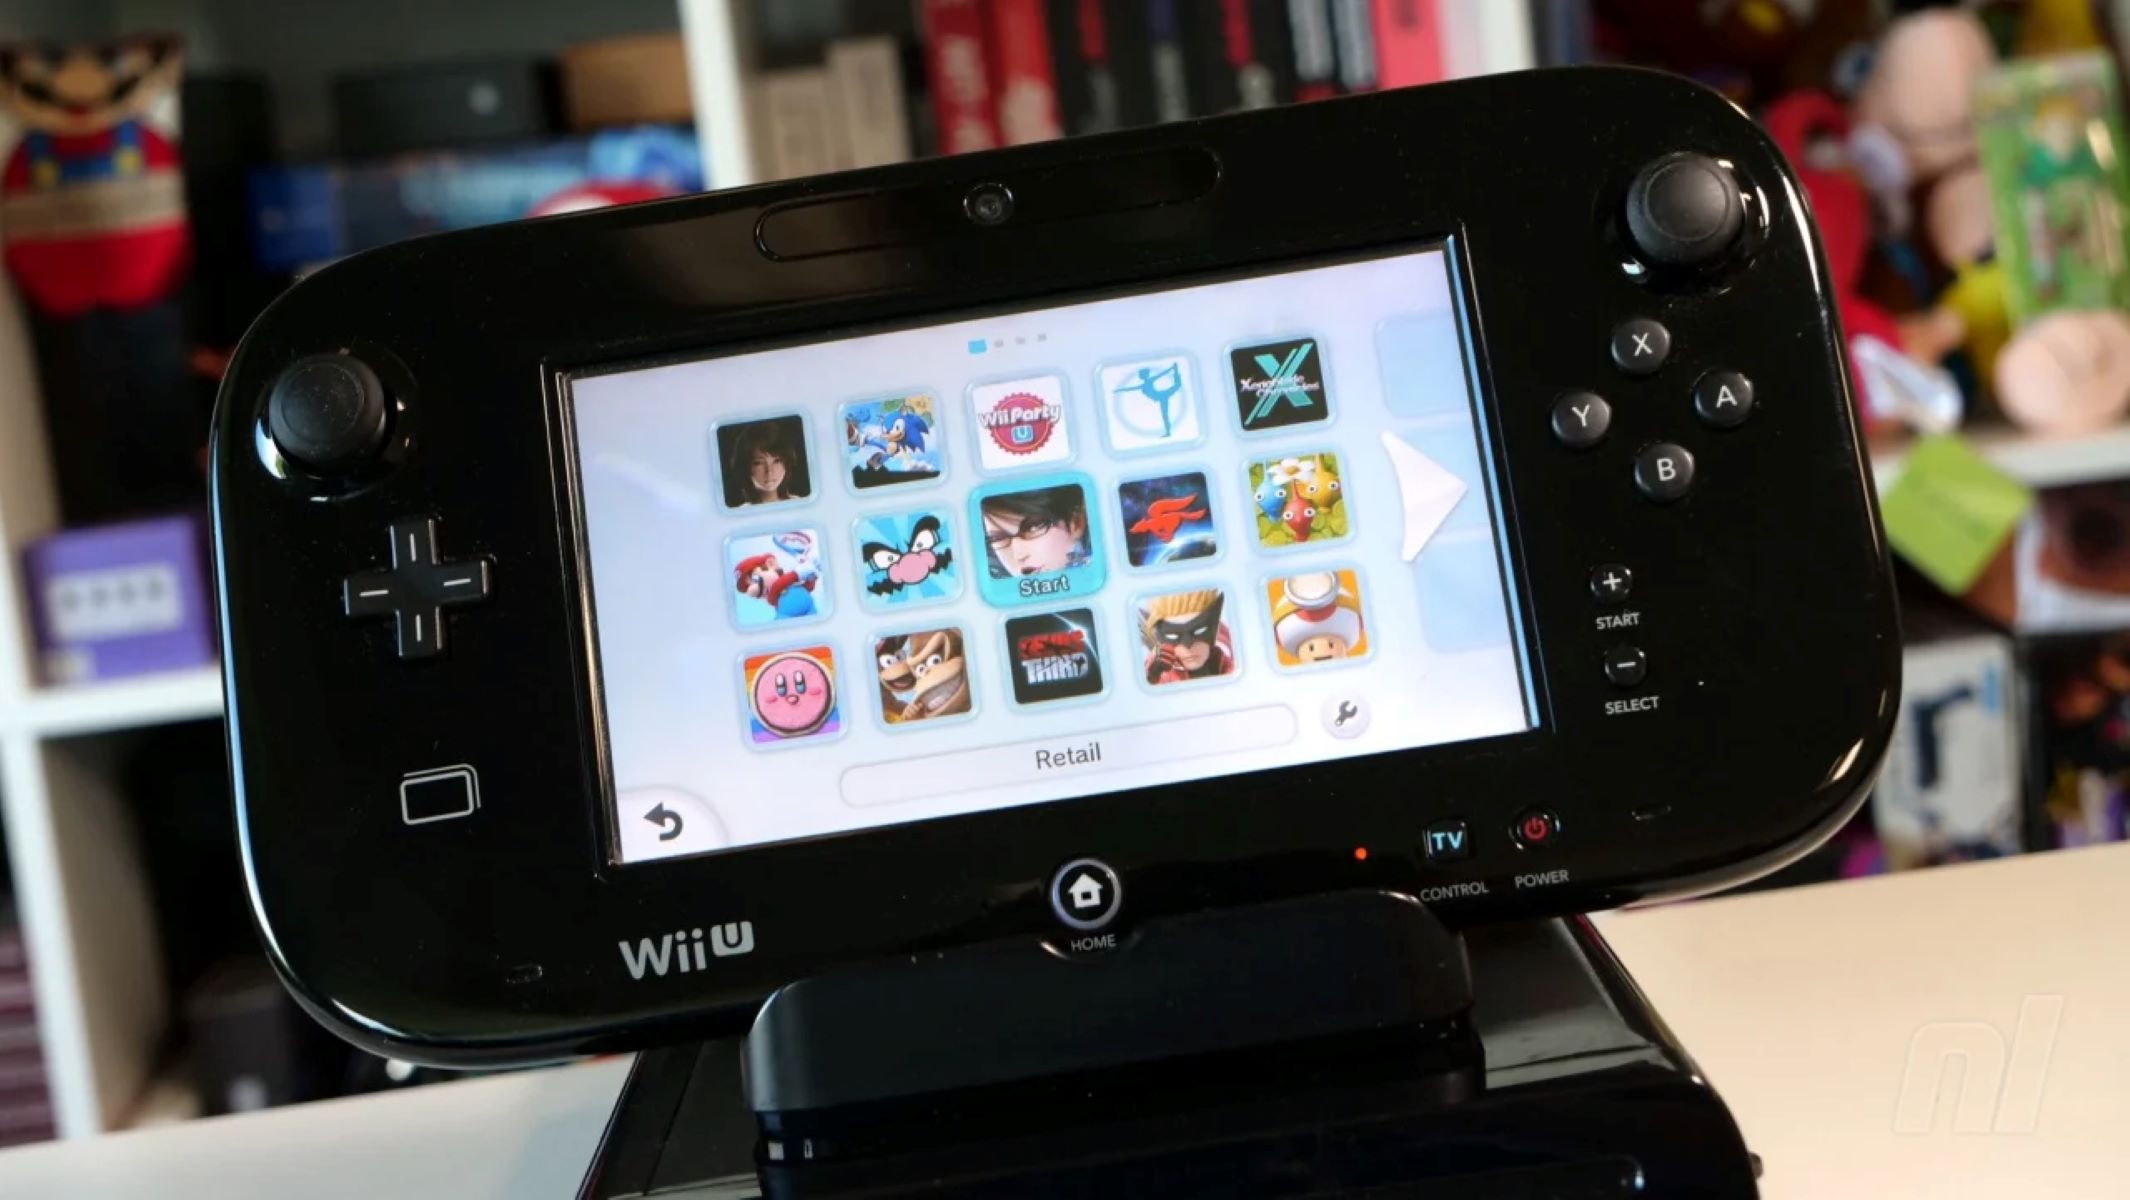 connect-wii-u-gamepad-to-pc-easy-setup-guide